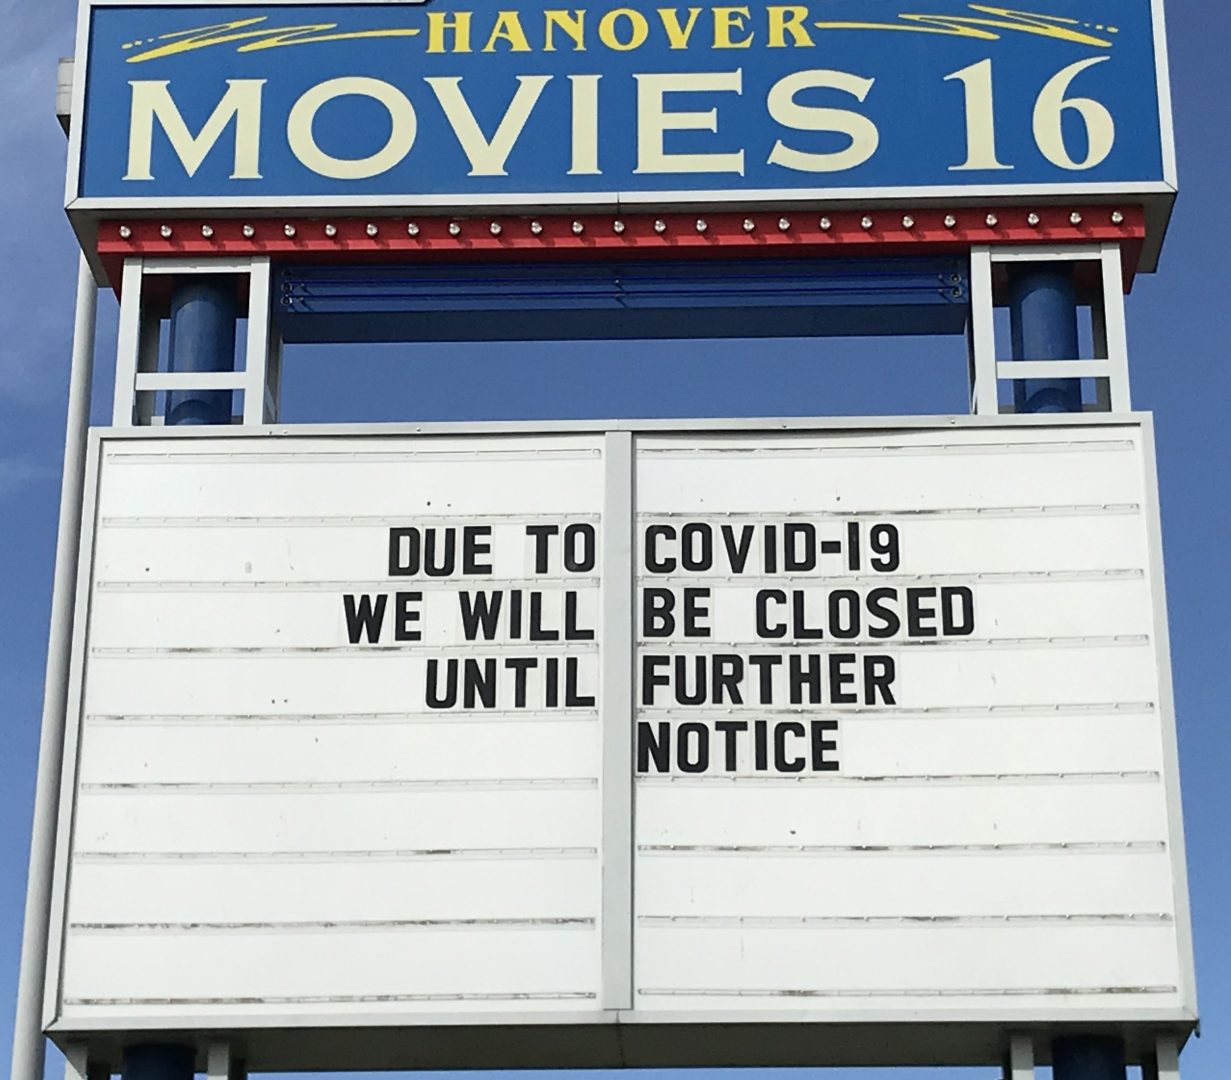 Entertainment businesses are among those closed by a shutdown imposed by Gov. Tom Wolf in an attempt to limit the spread of the coronavirus. A Hanover, Pa. movie theater sign is shown on March 21, 2020.